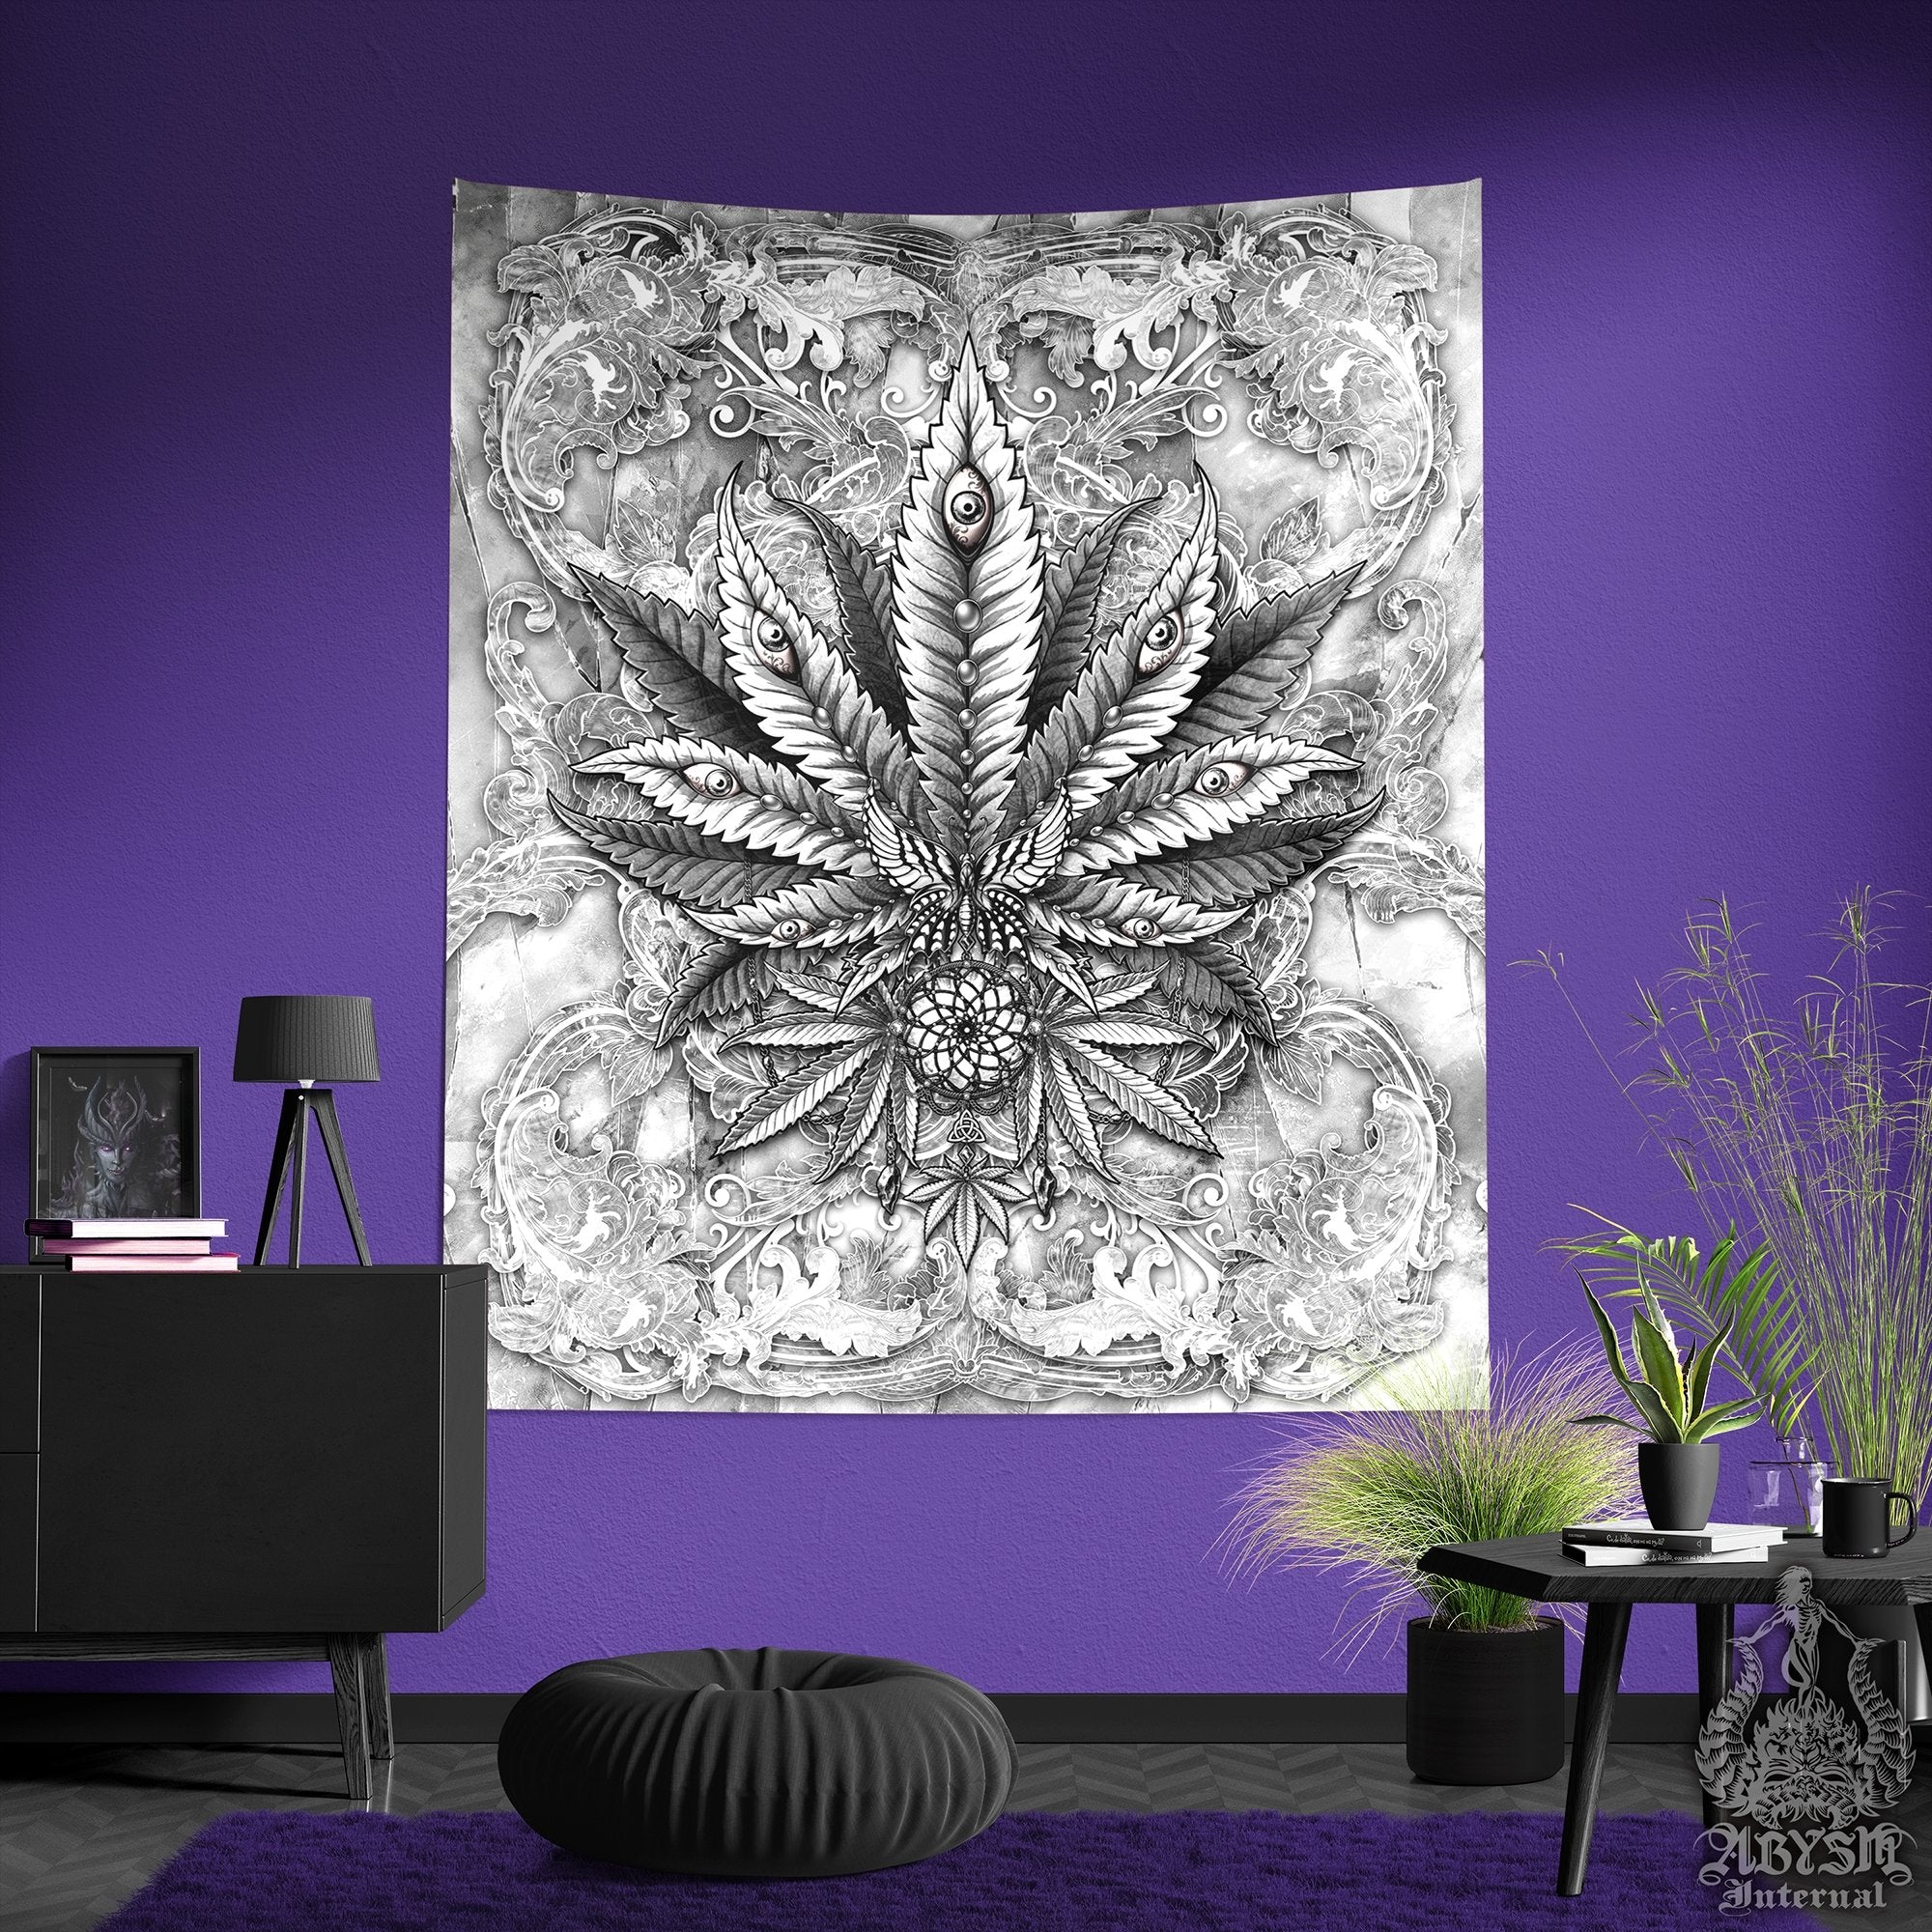 Weed Tapestry, Cannabis Shop Decor, Marijuana Wall Hanging, Indie Home Decor, White Goth Art Print, 420 Gift - Stone - Abysm Internal